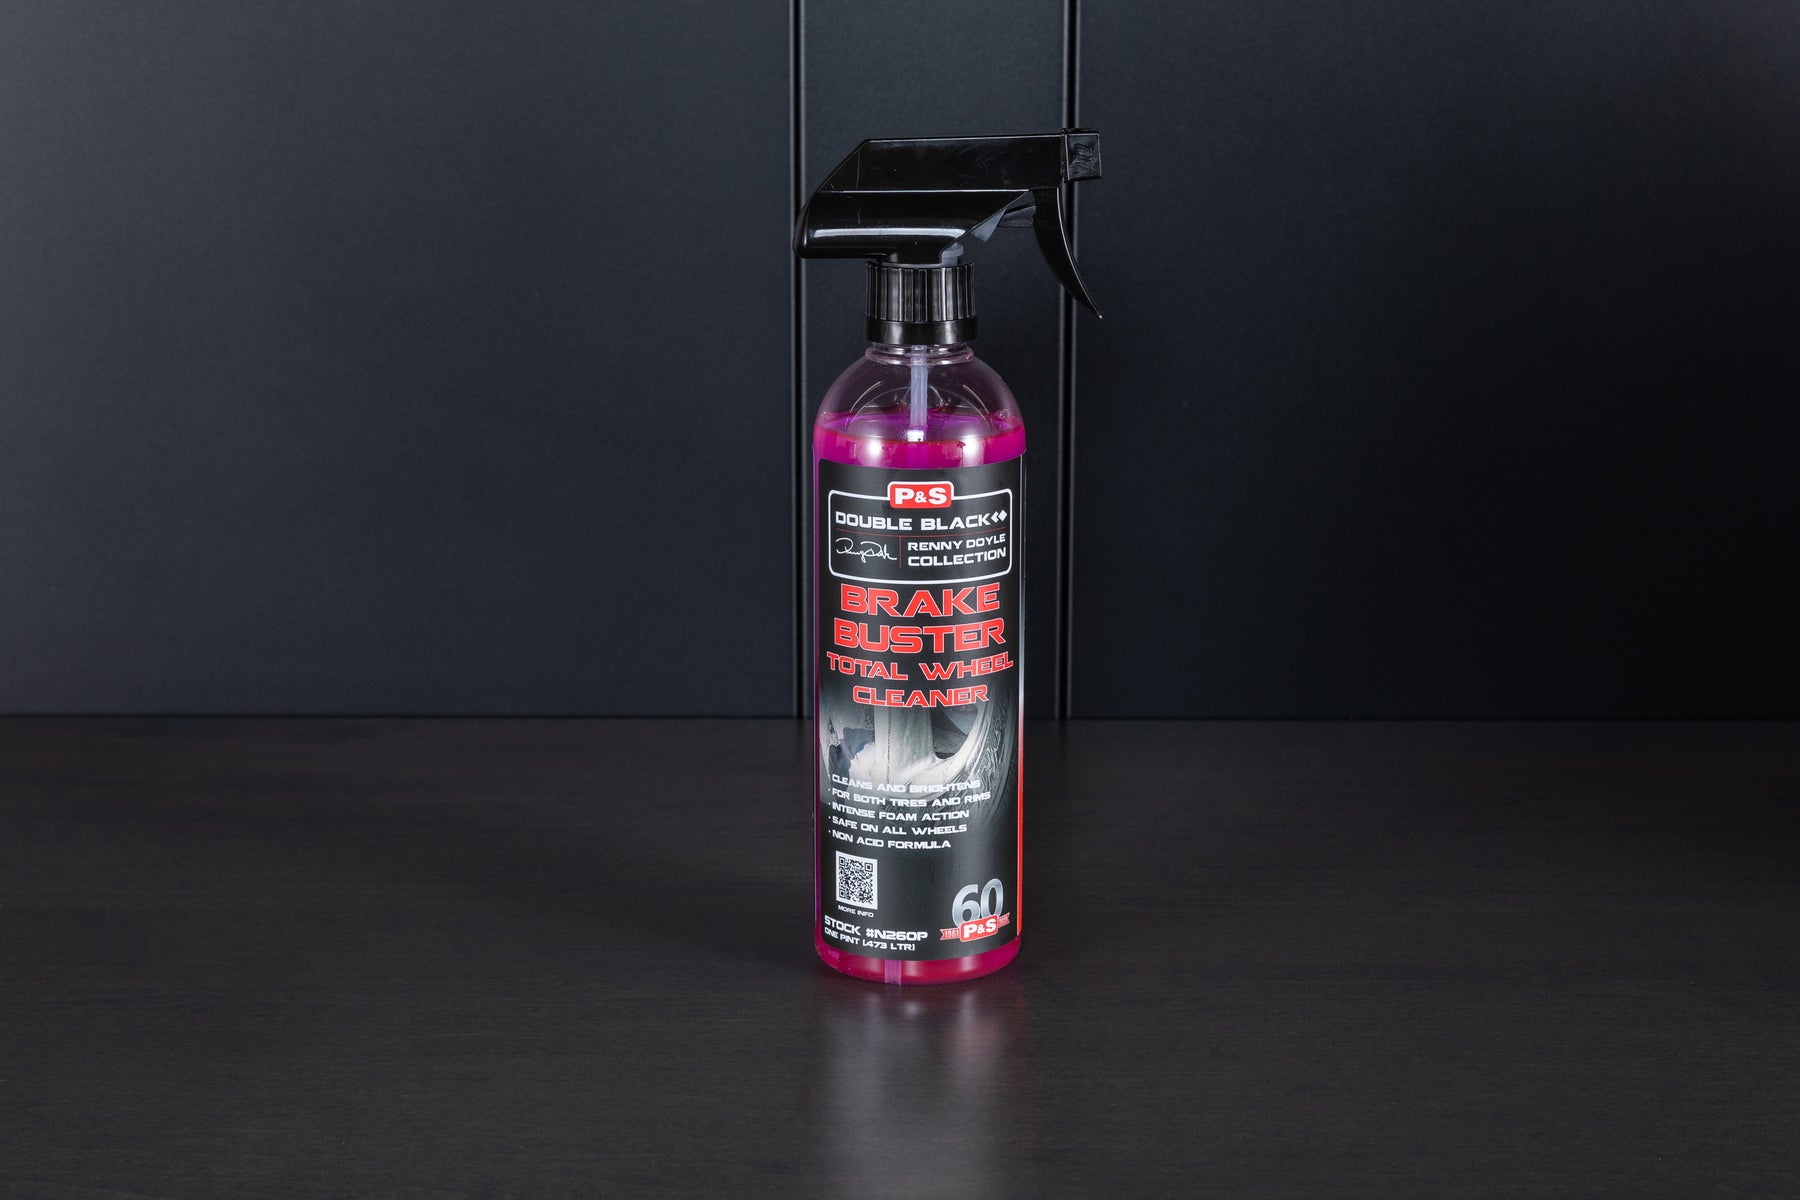 P&S Detailing Brake Buster Non Acid Wheel And Tire Cleaner – The